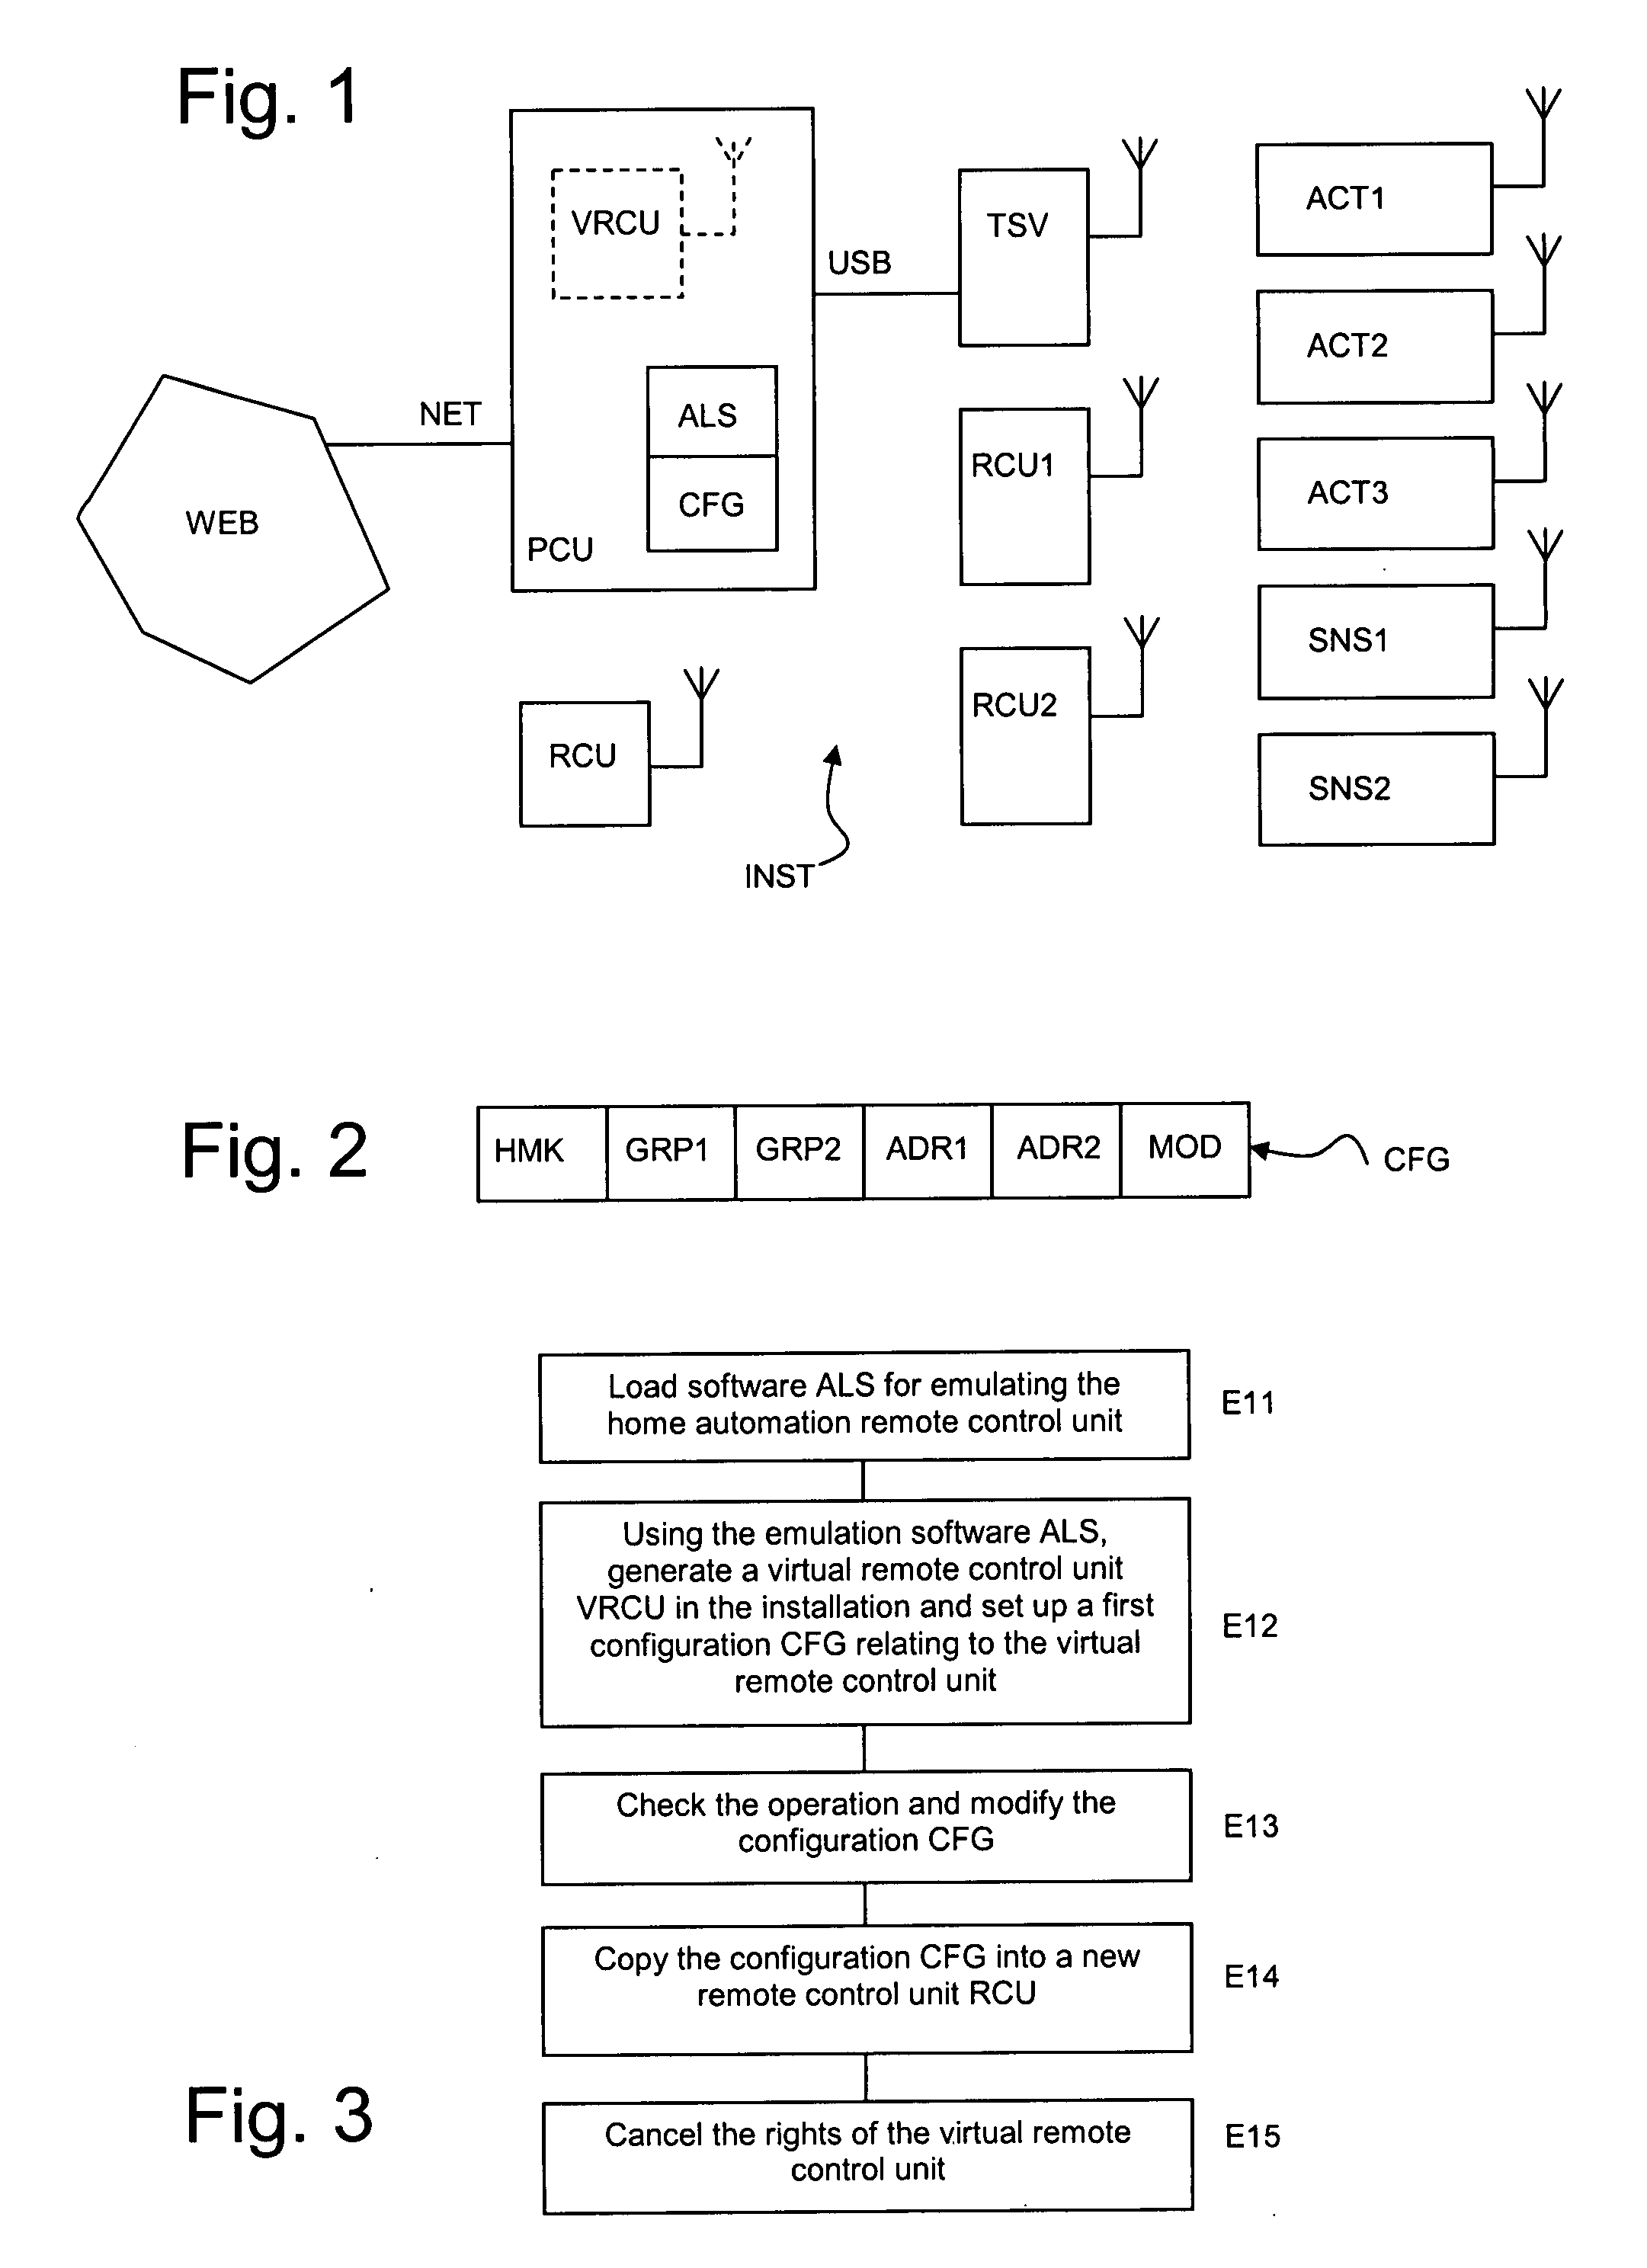 Method of testing and installing a home automation remote control unit